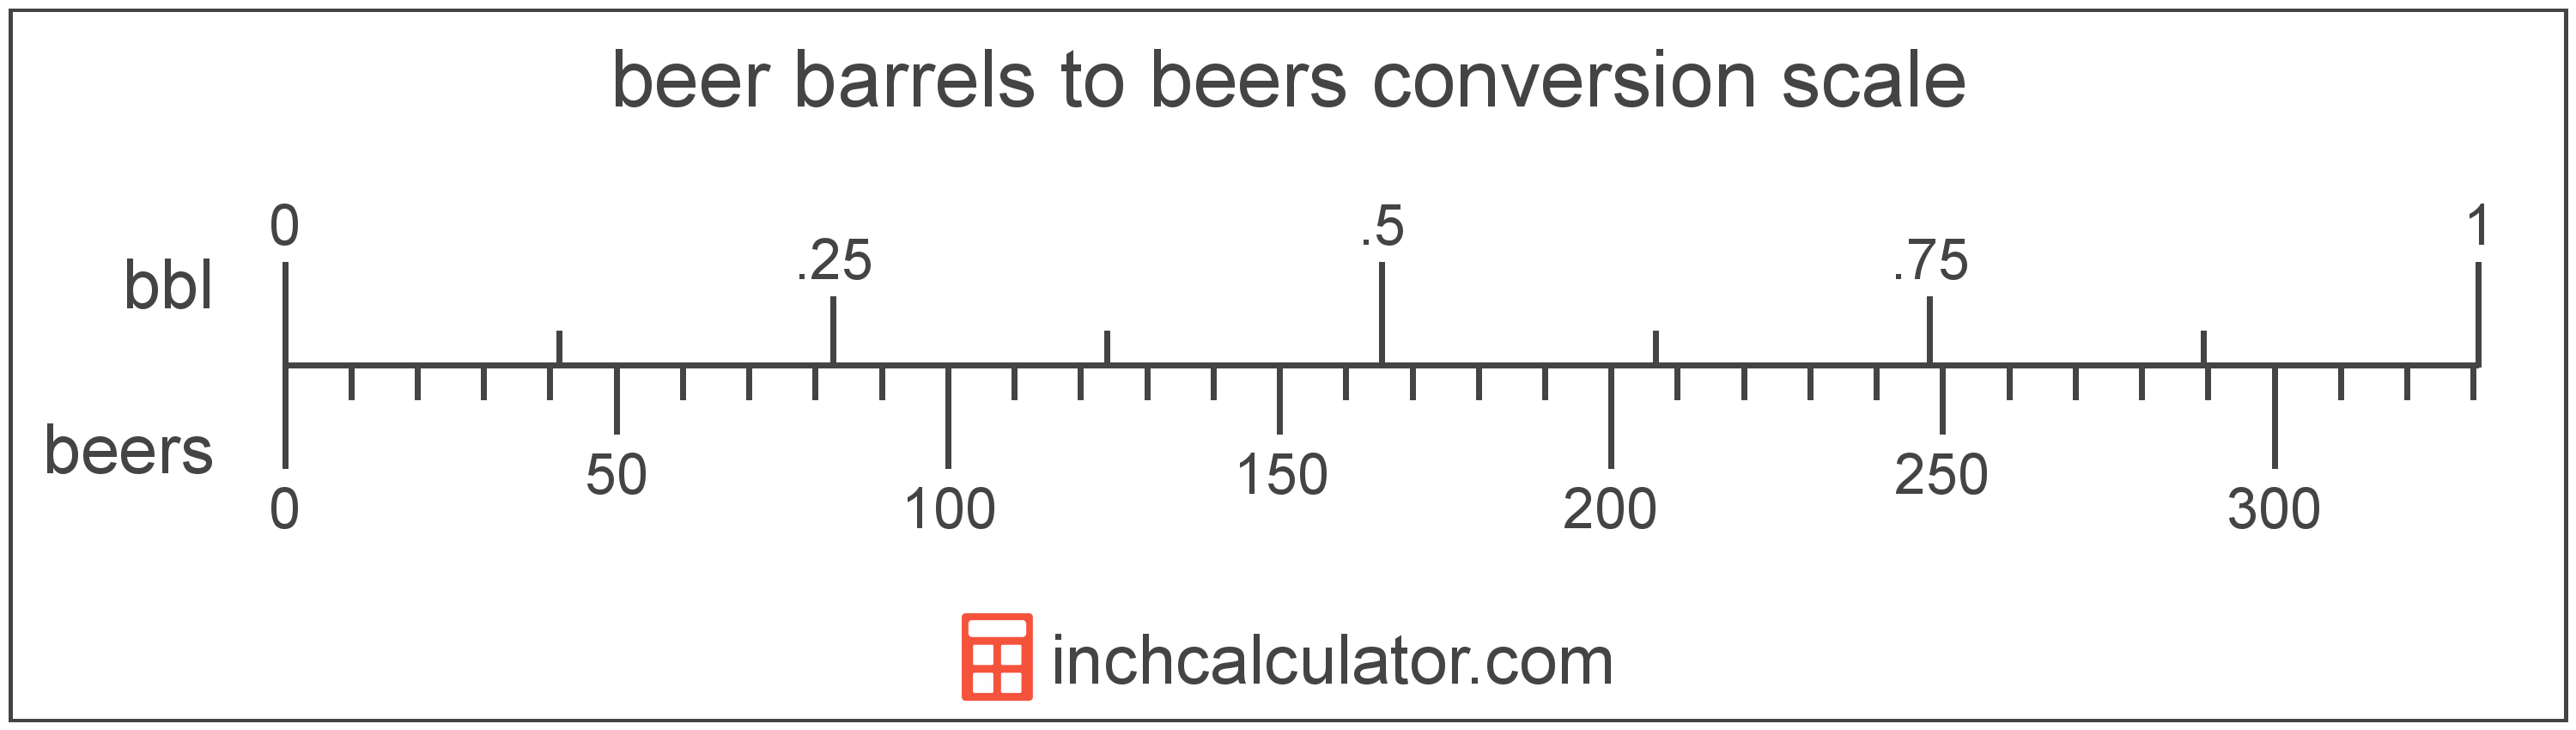 conversion scale showing beer barrels and equivalent beers beer volume values